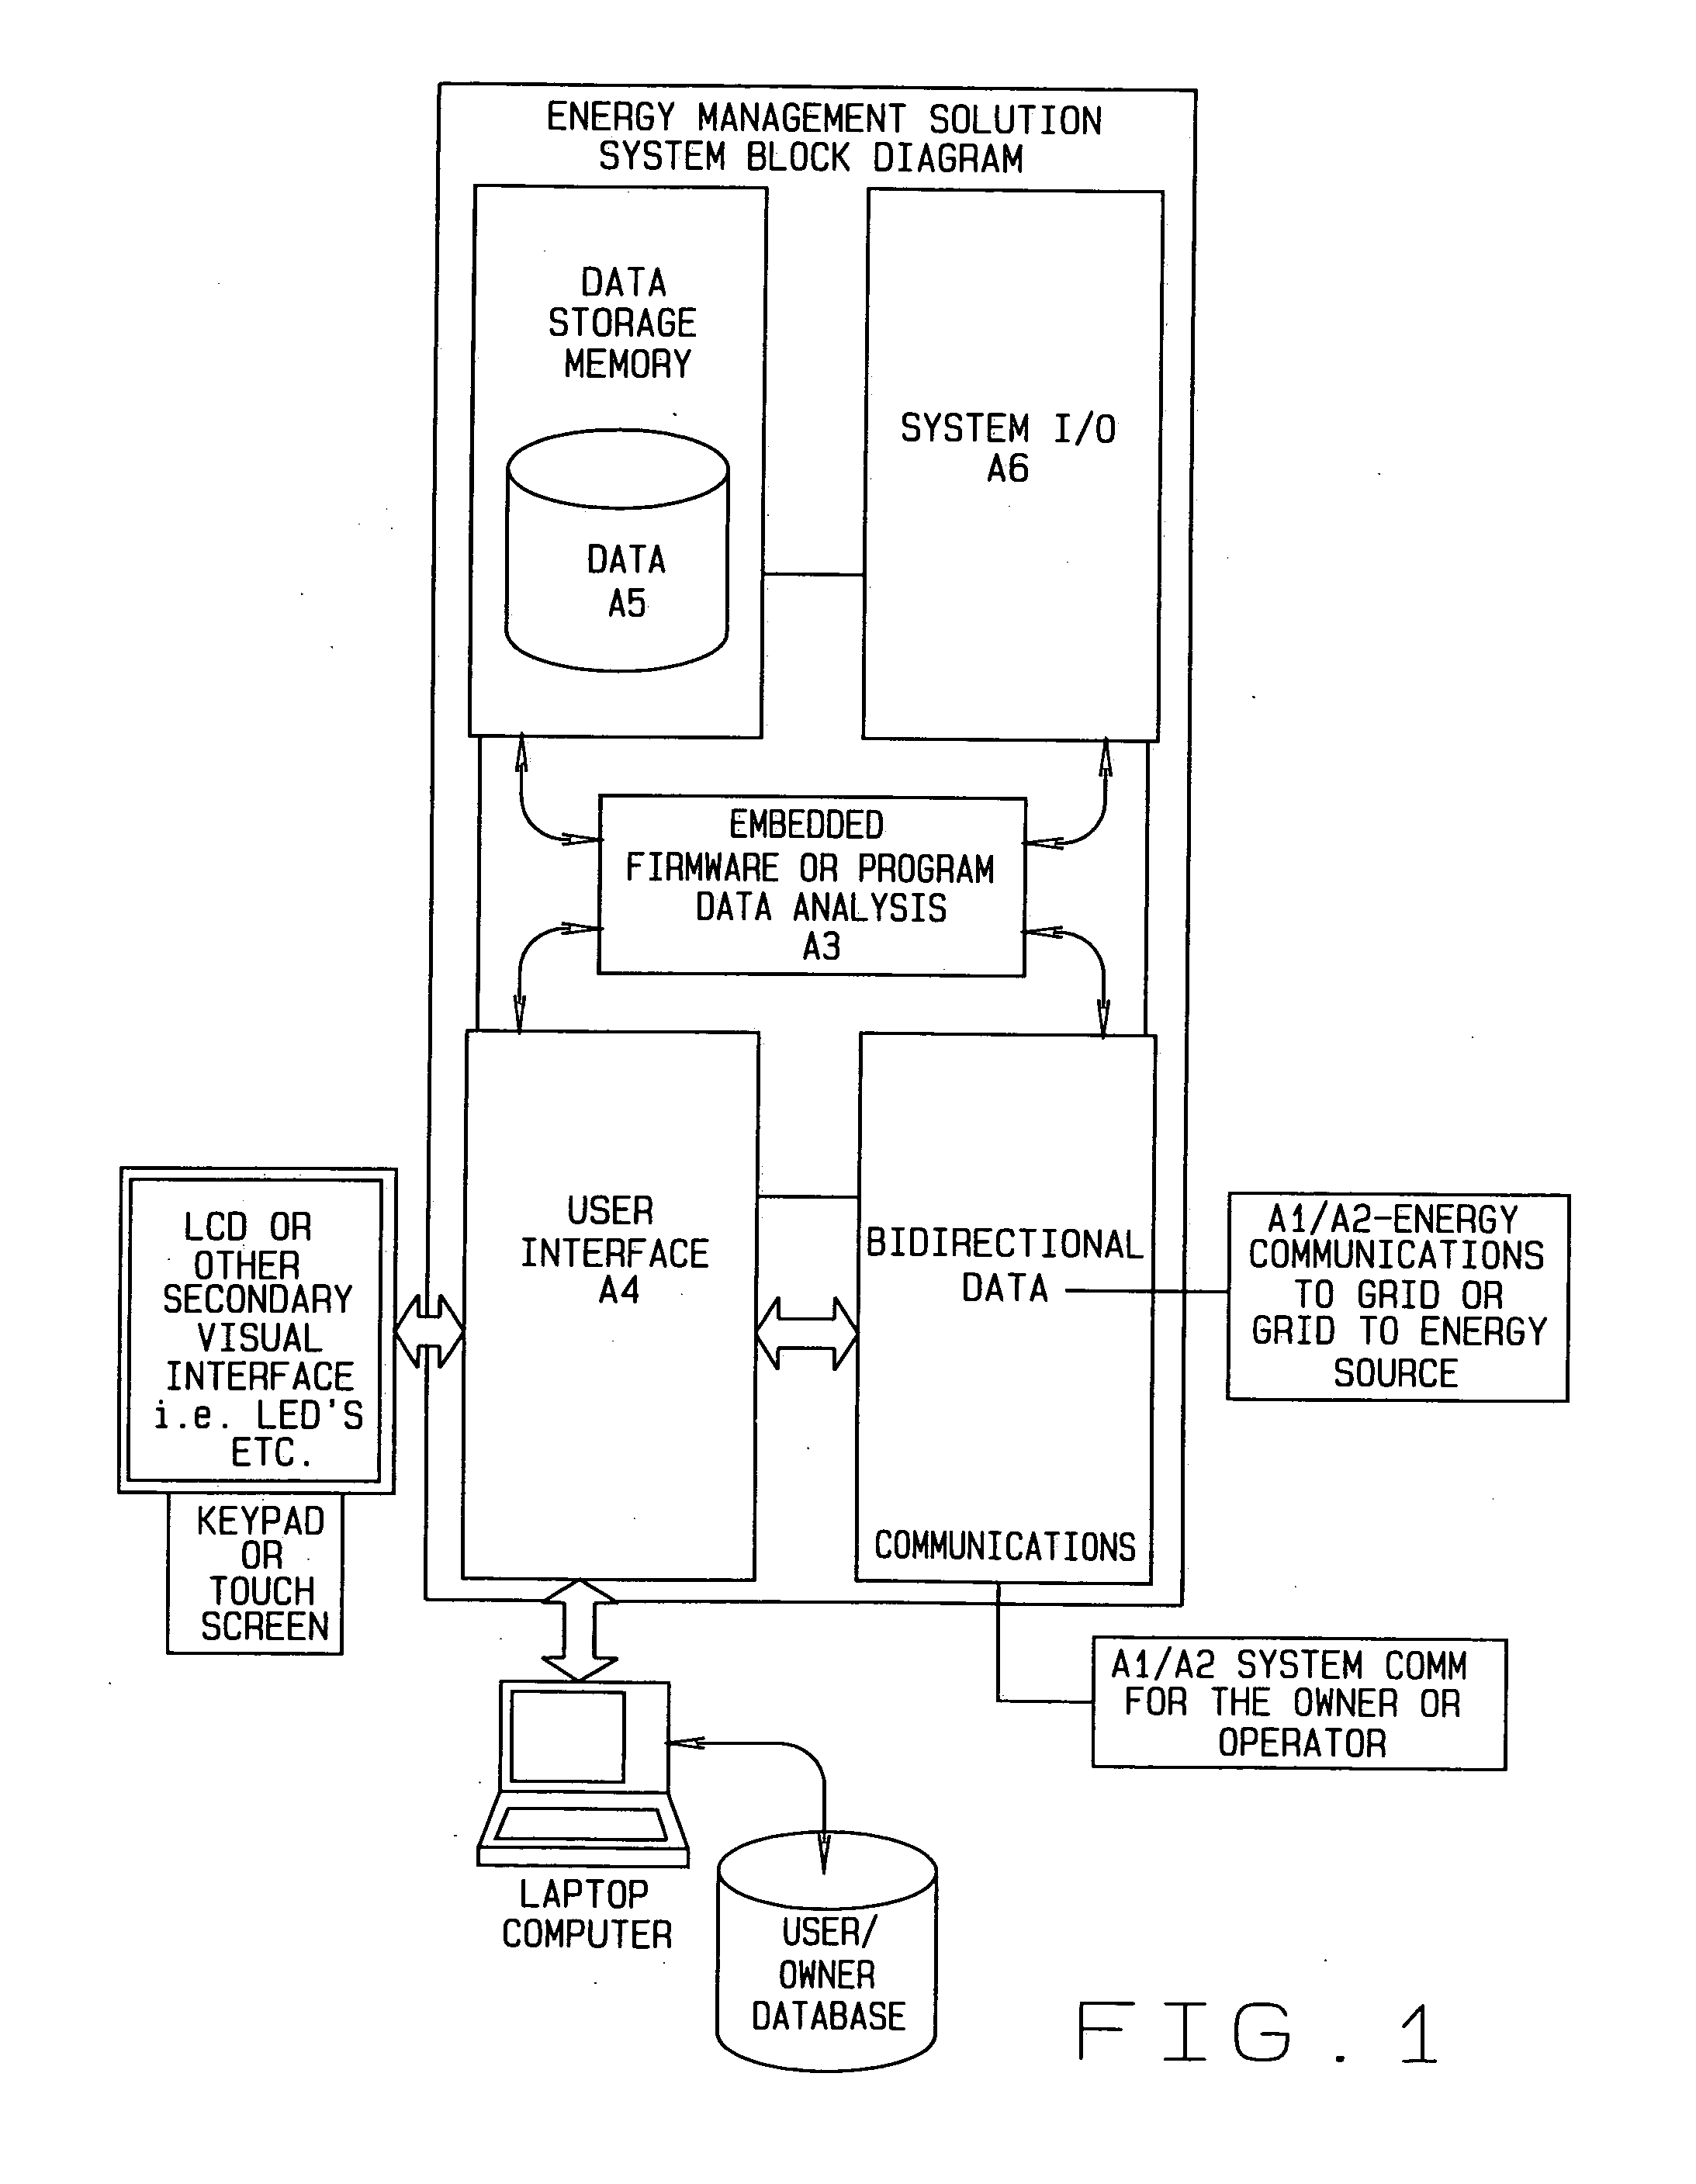 Method and process for an energy management system for setting and adjusting a minimum energy reserve for a rechargeable energy storage device